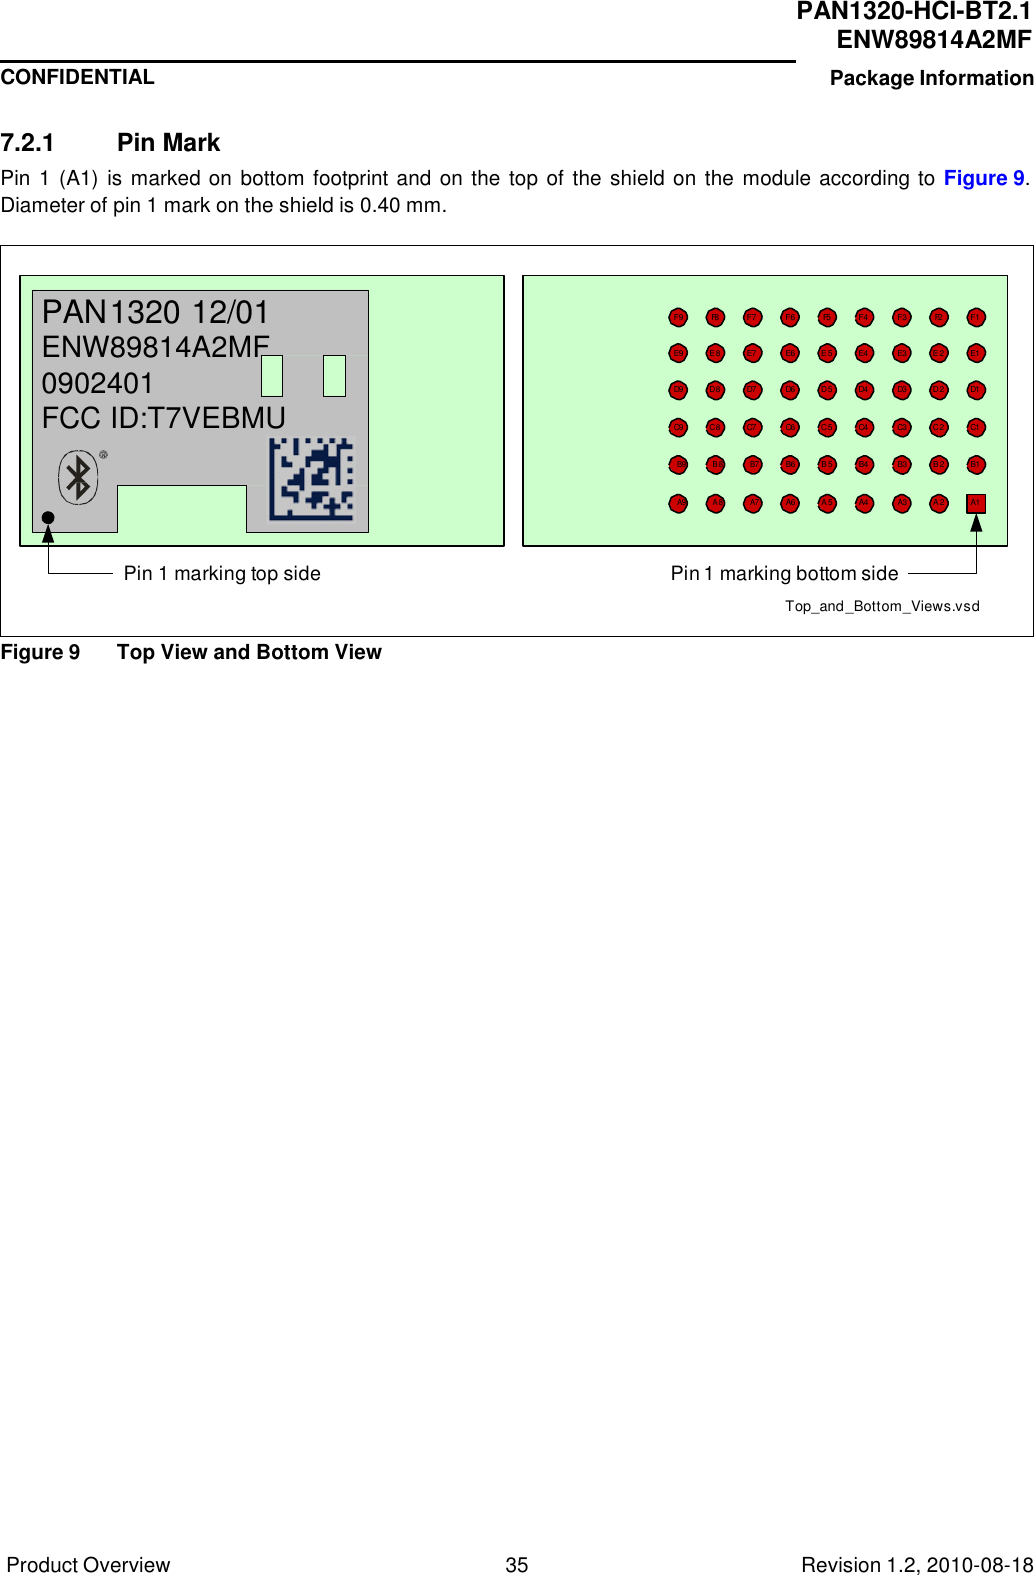 Product Overview 35 Revision 1.2, 2010-08-18   PAN1320-HCI-BT2.1 ENW89814A2MF CONFIDENTIAL Package Information     7.2.1  Pin Mark Pin 1 (A1) is marked on  bottom footprint and on the top  of the shield on the module according to Figure 9. Diameter of pin 1 mark on the shield is 0.40 mm.     PAN 1320 12/01 ENW89814A2MF 0902401 FCC ID:T7VEBMU  F9  F8  F7  E9  E8  E7  D9  D8  D7  C9  C8  C7  F6  F5  F4  E6  E5  E4  D6  D5  D4  C6  C5  C4  F3  F2  F1  E3  E2  E1  D3  D2  D1  C3  C2  C1  B9 B8 B7  B6  B5  B4  B3  B2  B1  A9 A8 A7  A6  A5  A4  A3  A2  A1   Pin 1 marking top side Pin 1 marking bottom side  Top_and _Bottom_Views.vsd  Figure 9  Top View and Bottom View 